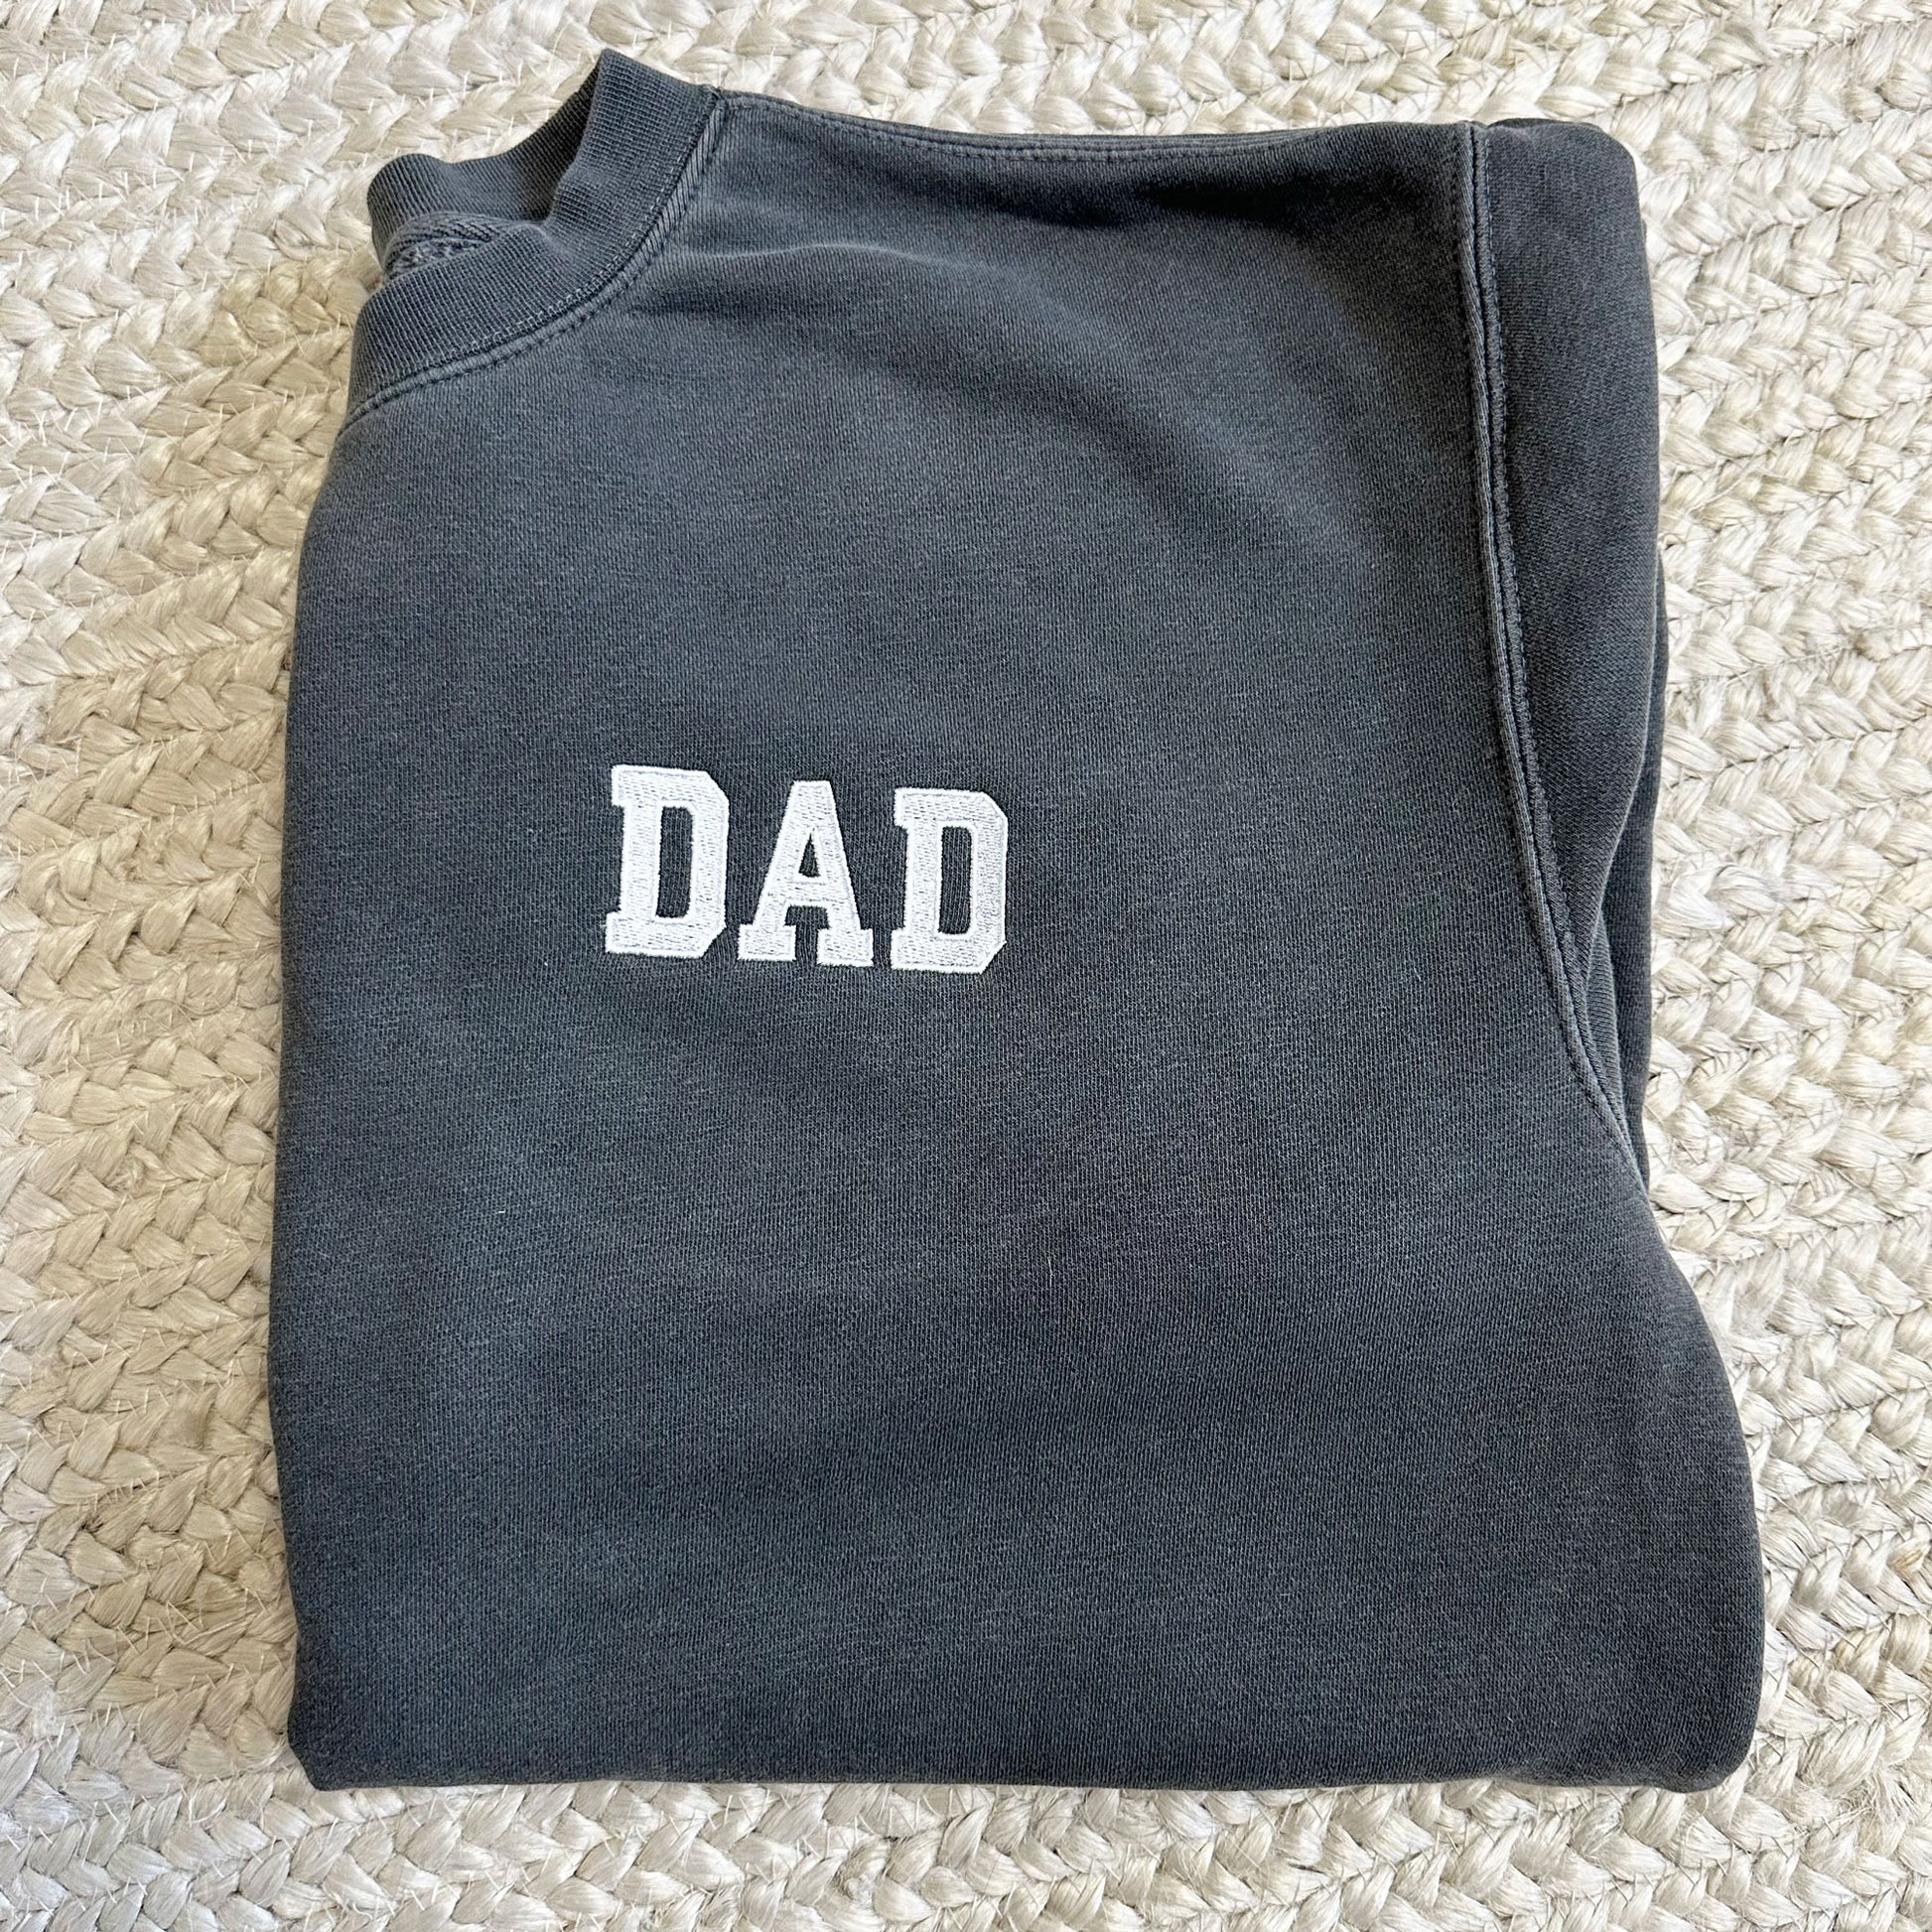 Black crewneck sweatshirt with varsity block letters DAD embroidered on the left chest.